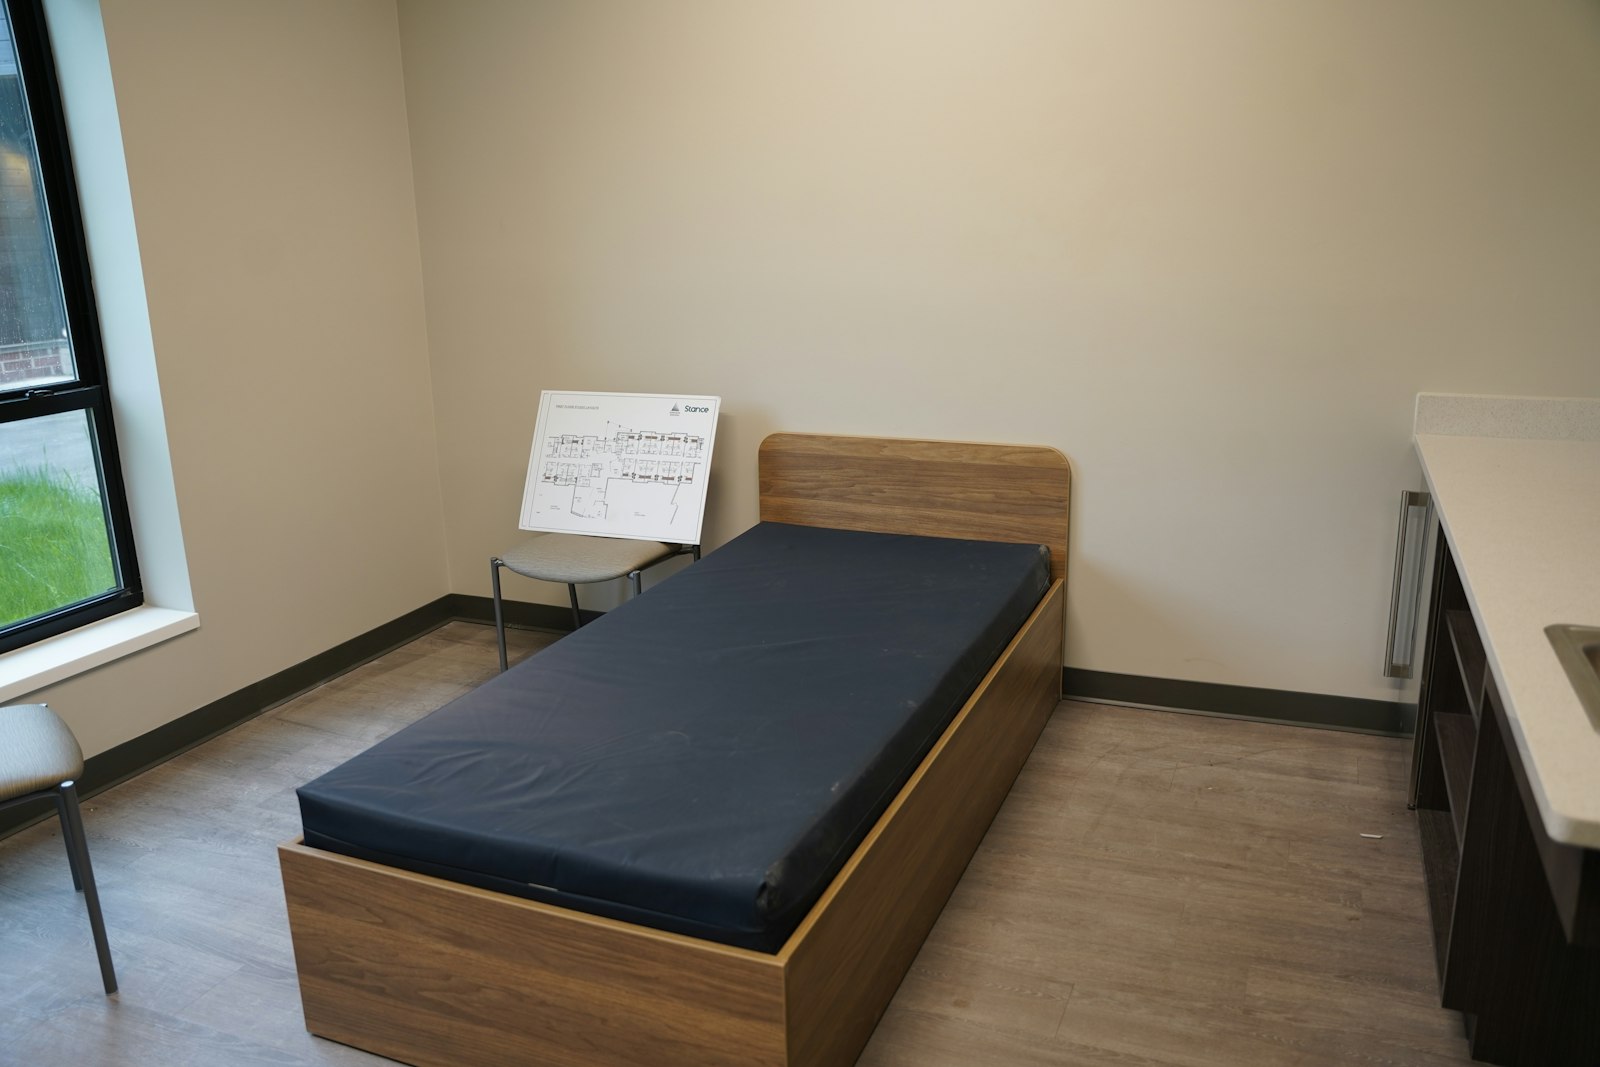 The bridge housing facility features 40 furnished units for guests, complete with a microwave, small fridge and a TV to provide some noise in the room. Fr. McCabe said having a furnished room for guests to move into is critical because it provides a greater sense of home.